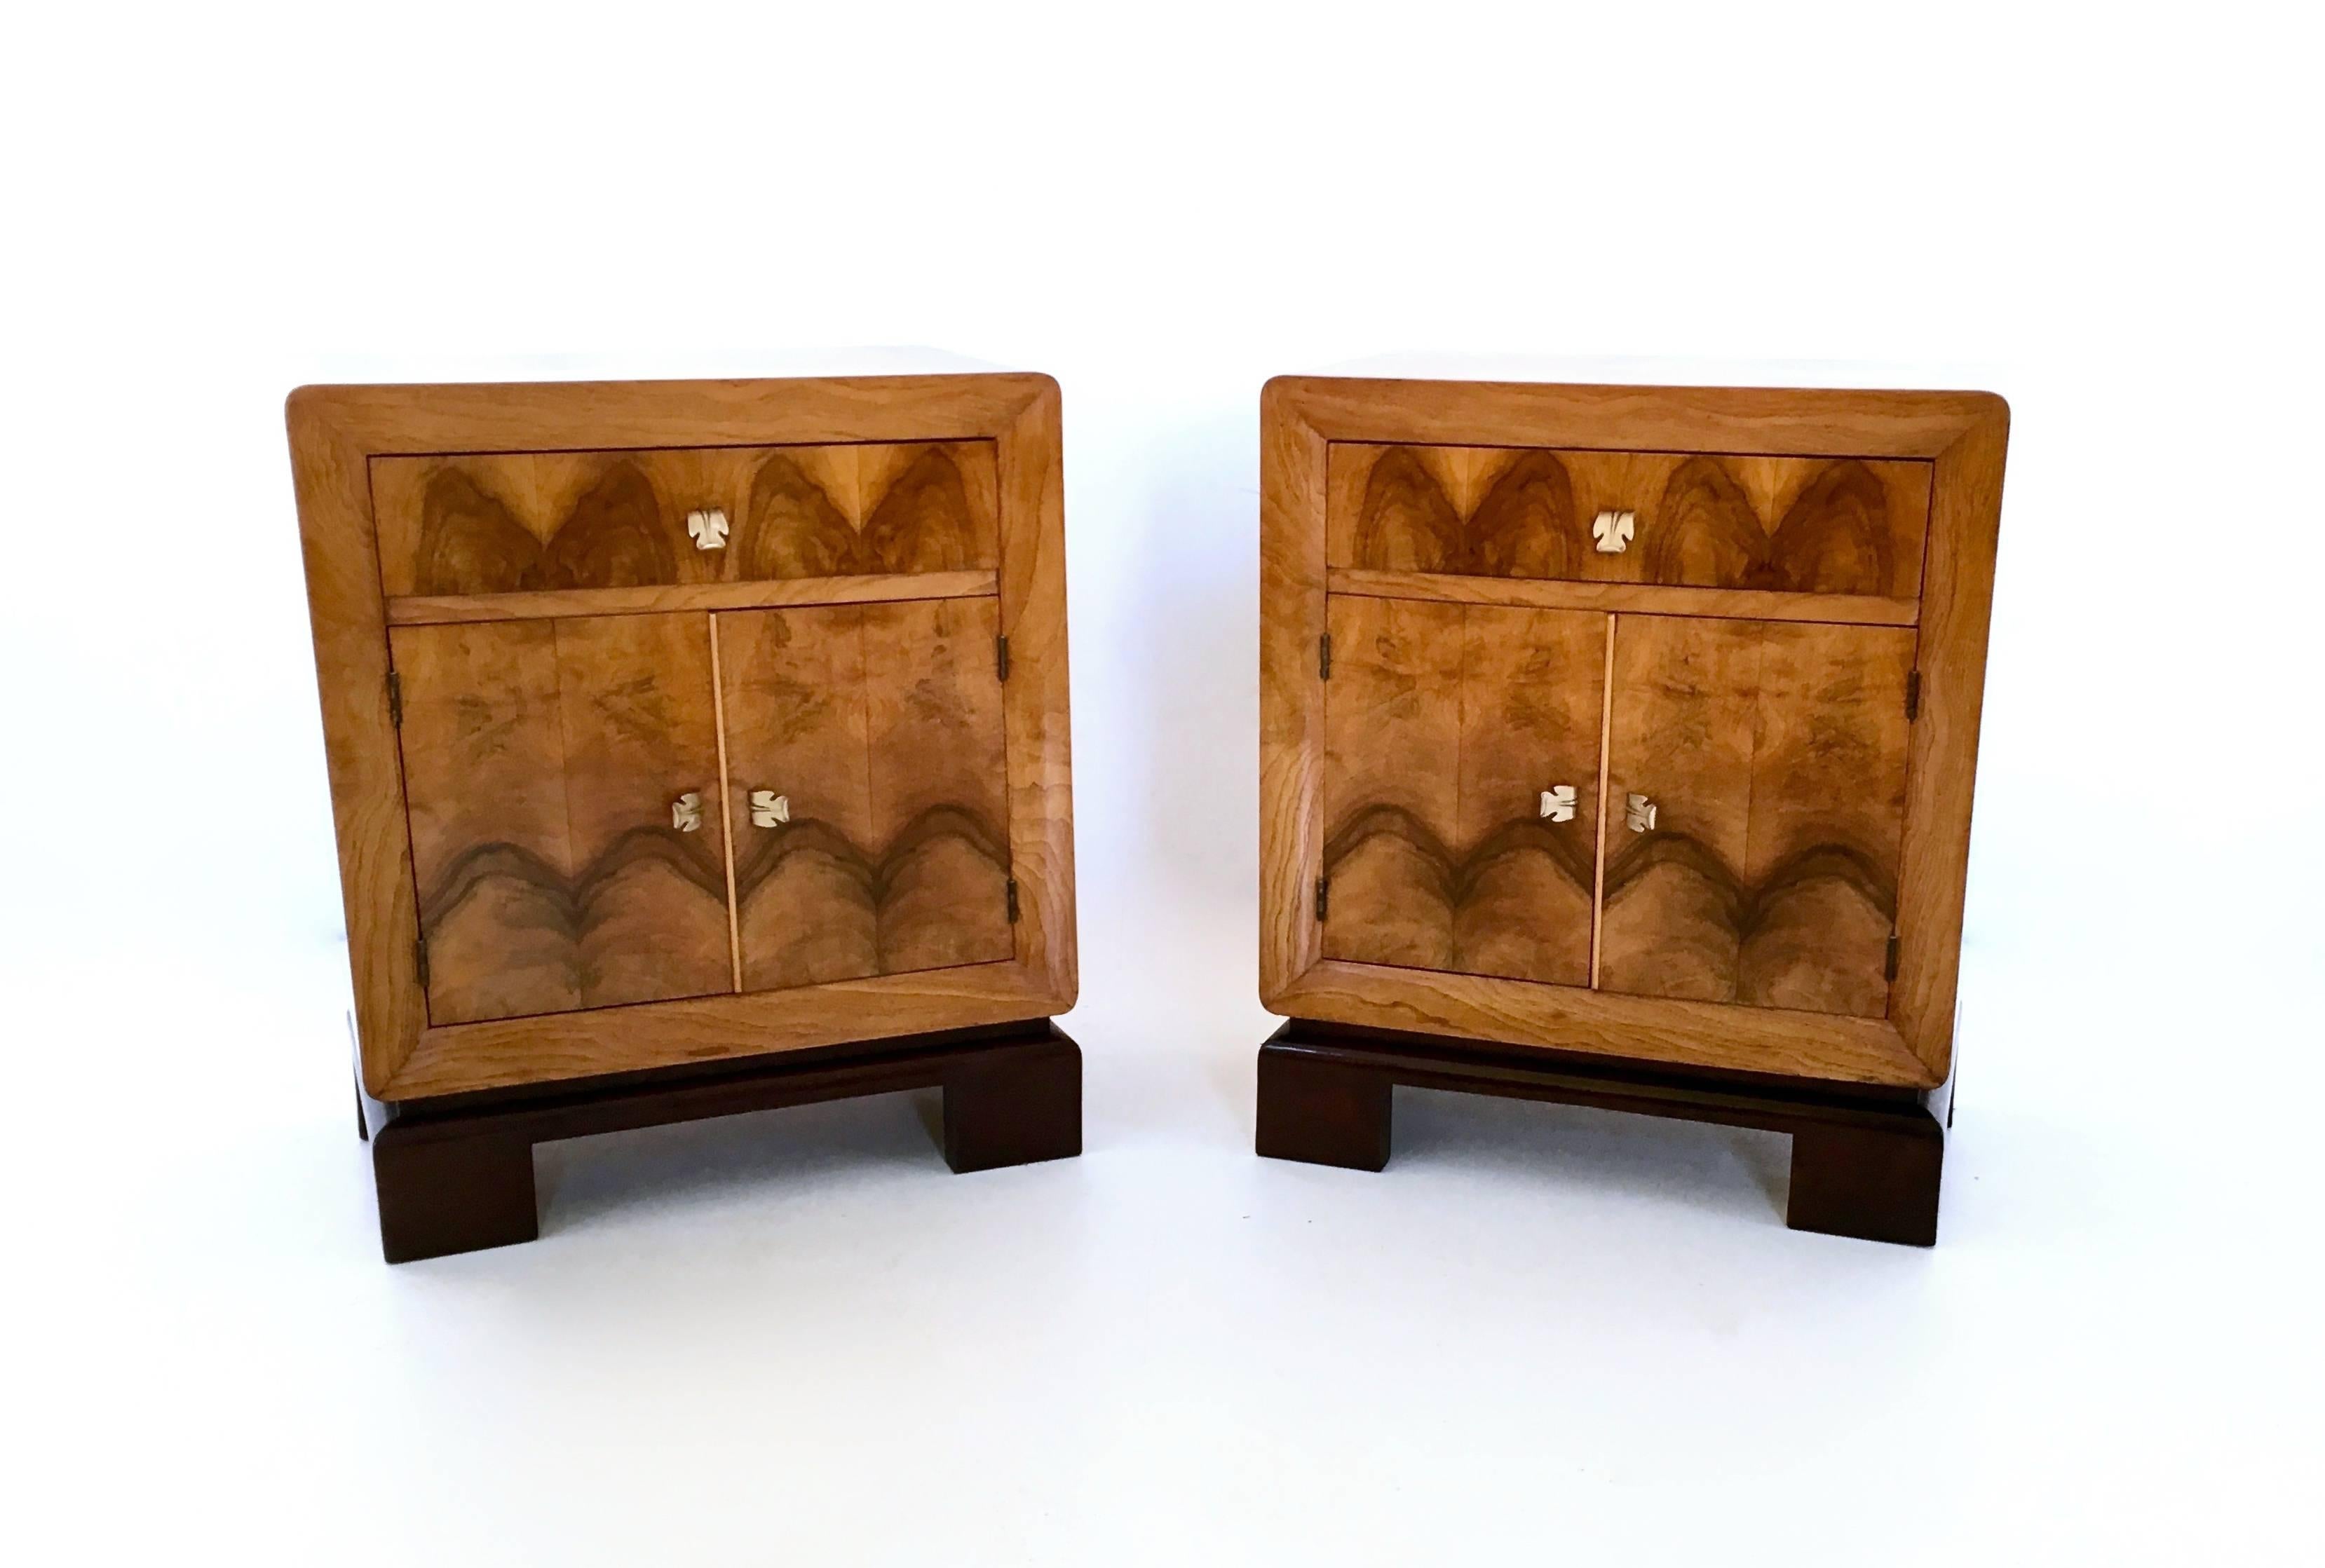 Made from walnut, ebonized beech and brass.
In perfect condition.
They have been polished with shellac and ready to use.